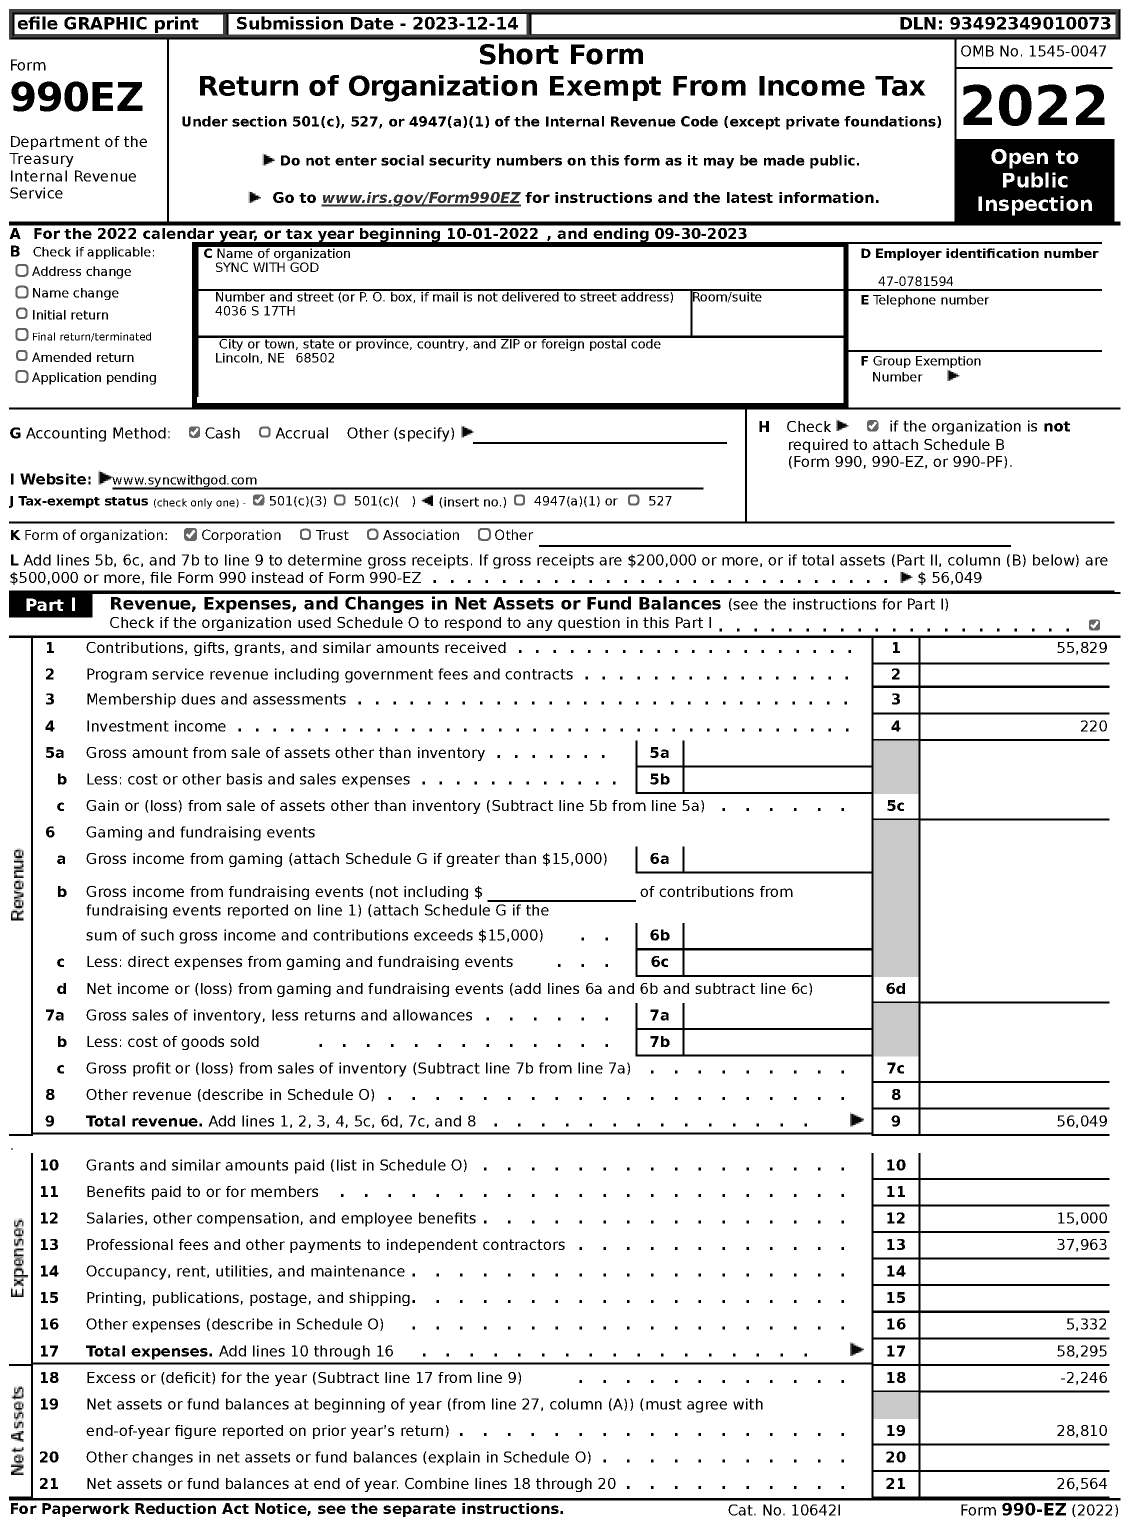 Image of first page of 2022 Form 990EZ for Sync with God